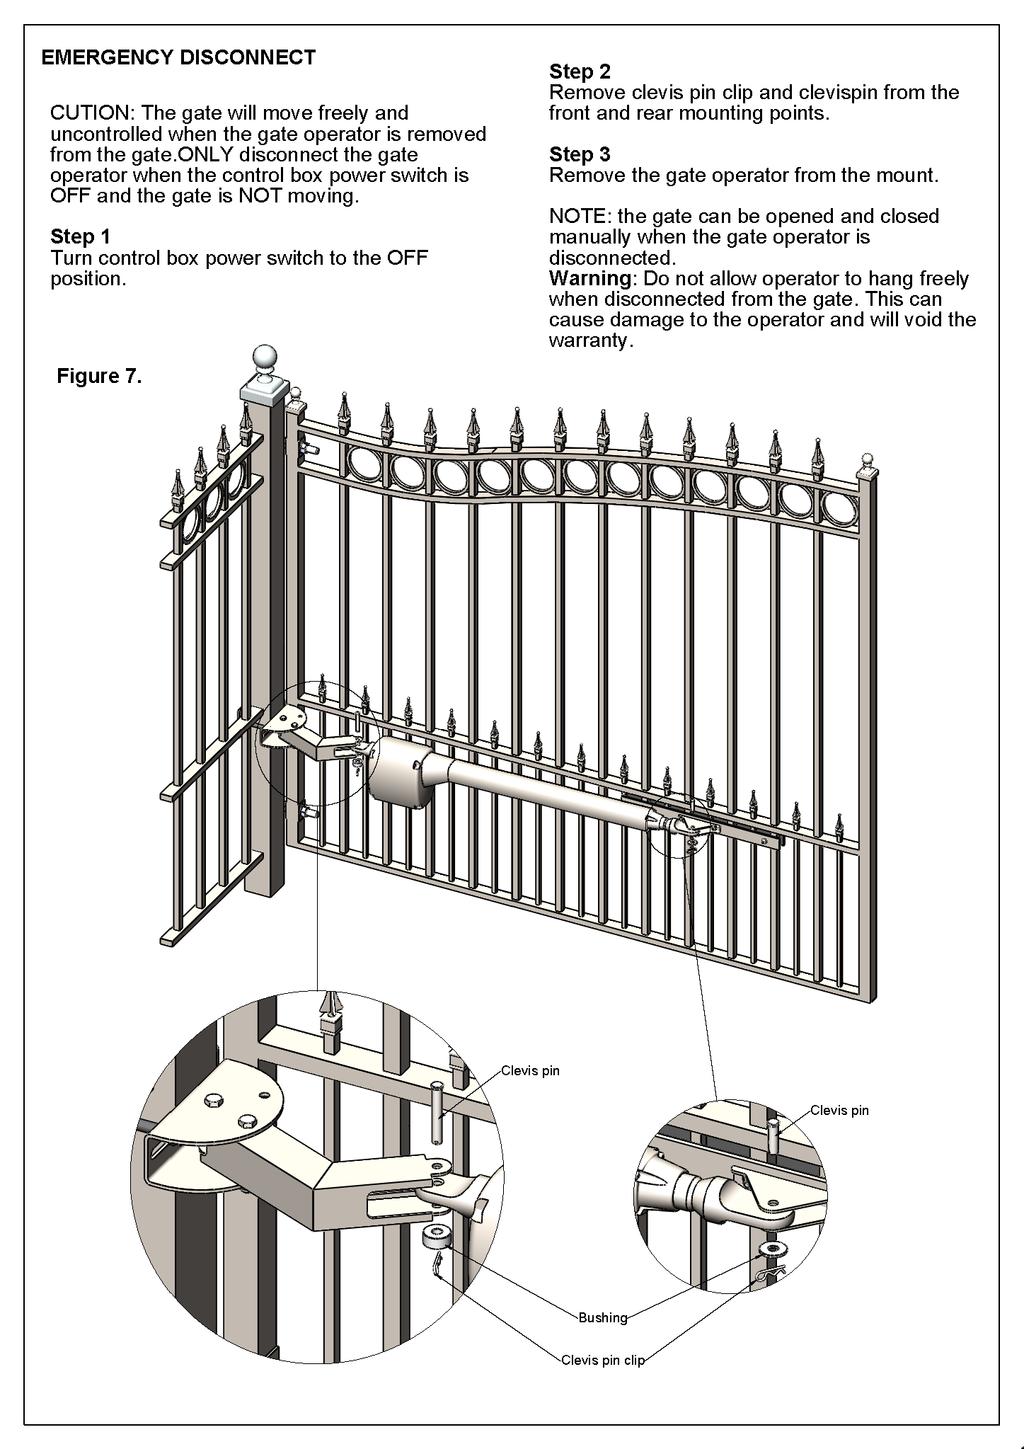 EMERGENCY DISCONNECT CAUTION: The gate will move freely and uncontrolled when the gate operator is removed from the